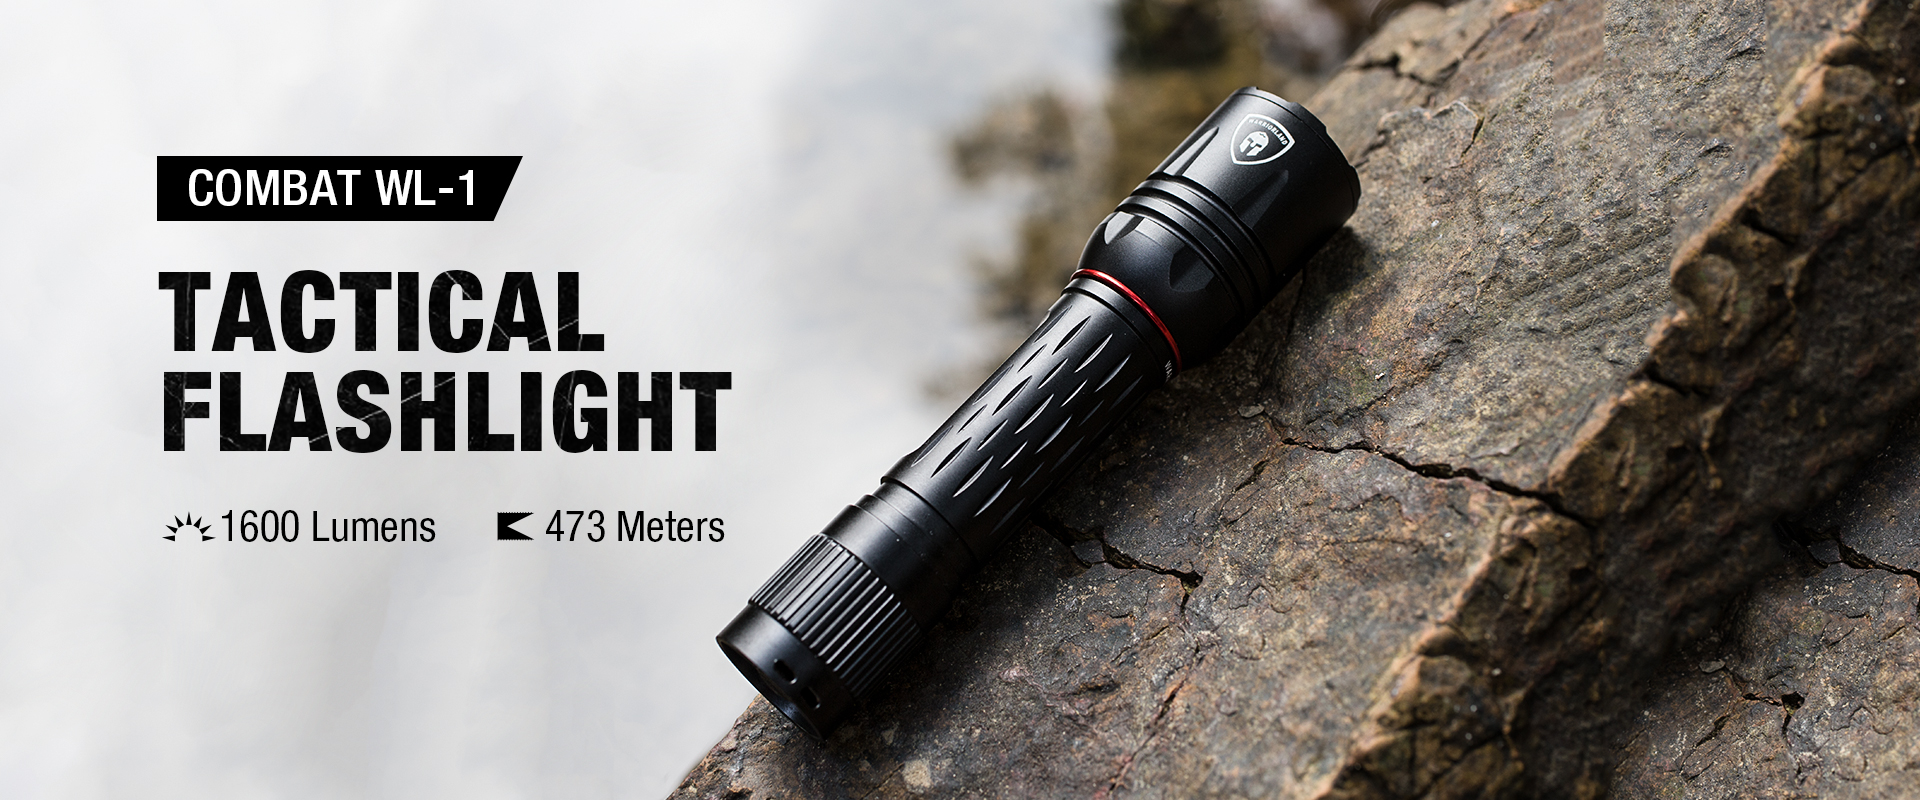 What Is The Difference Between A Tactical Flashlight And An Ordinary Flashlight?